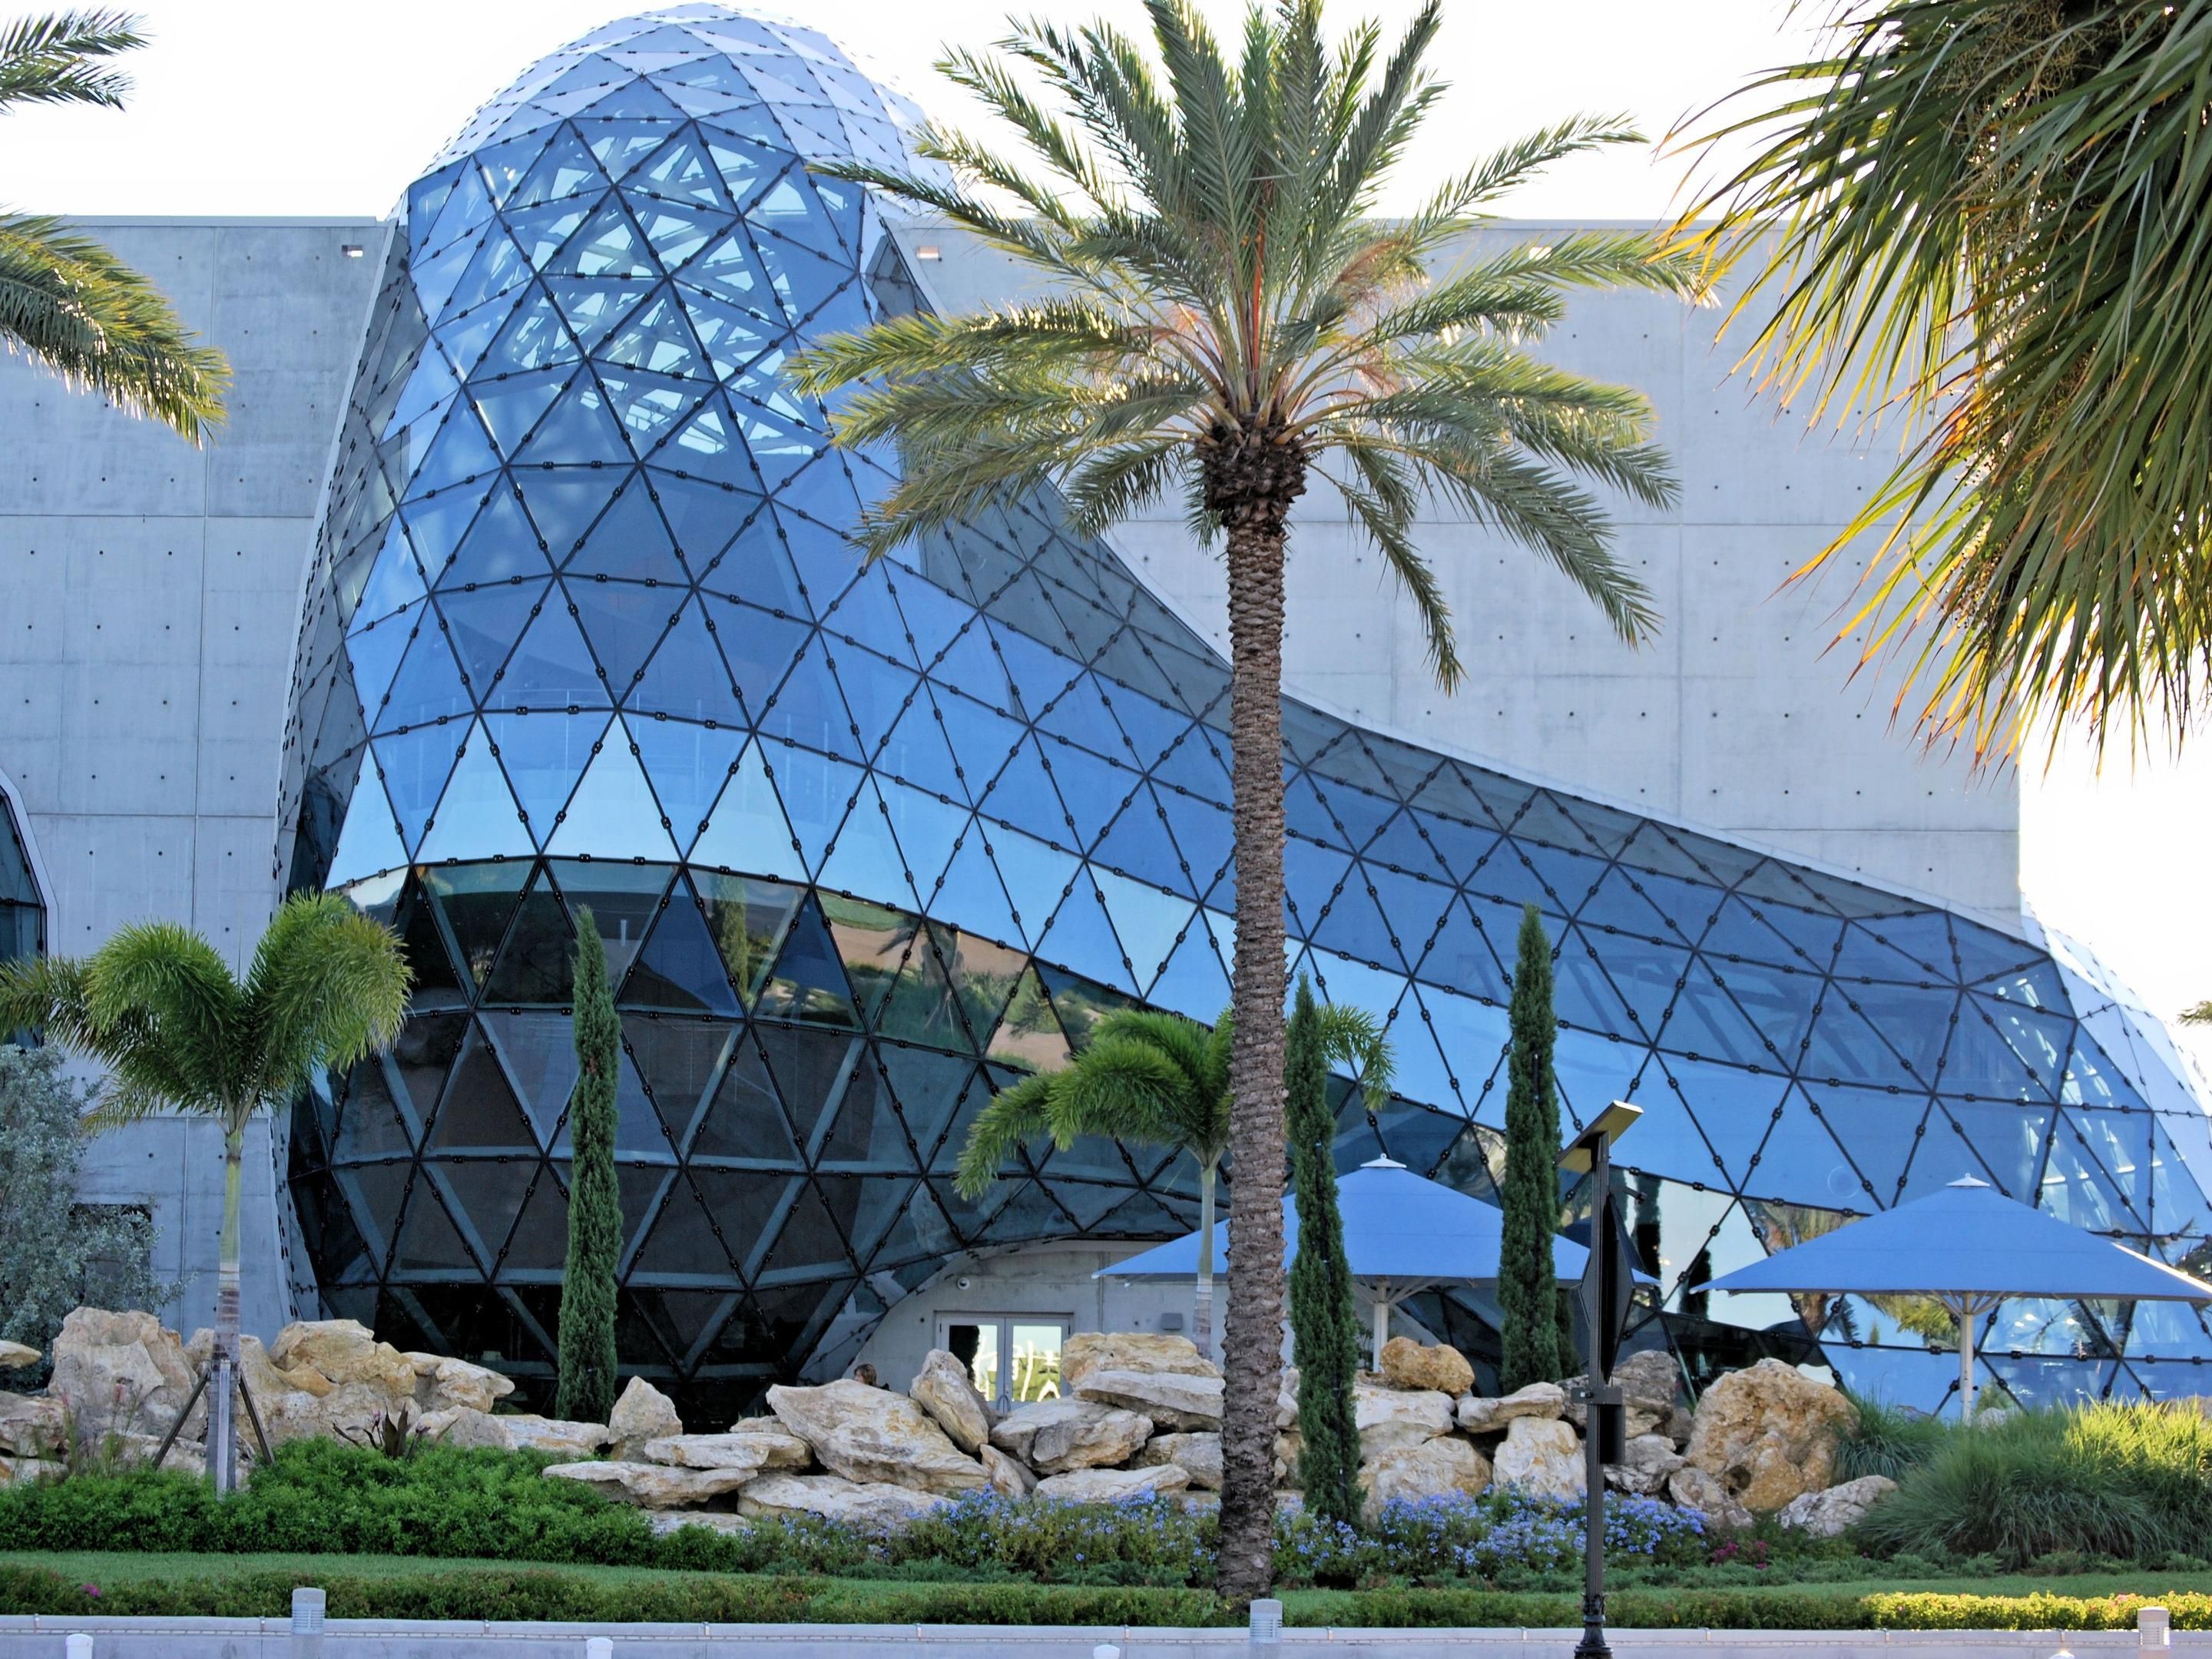 The Salvador Dalí Museum is an art museum dedicated to the works of Salvador Dalí. It is located on the downtown St. Don't leave St. Pete without a visit